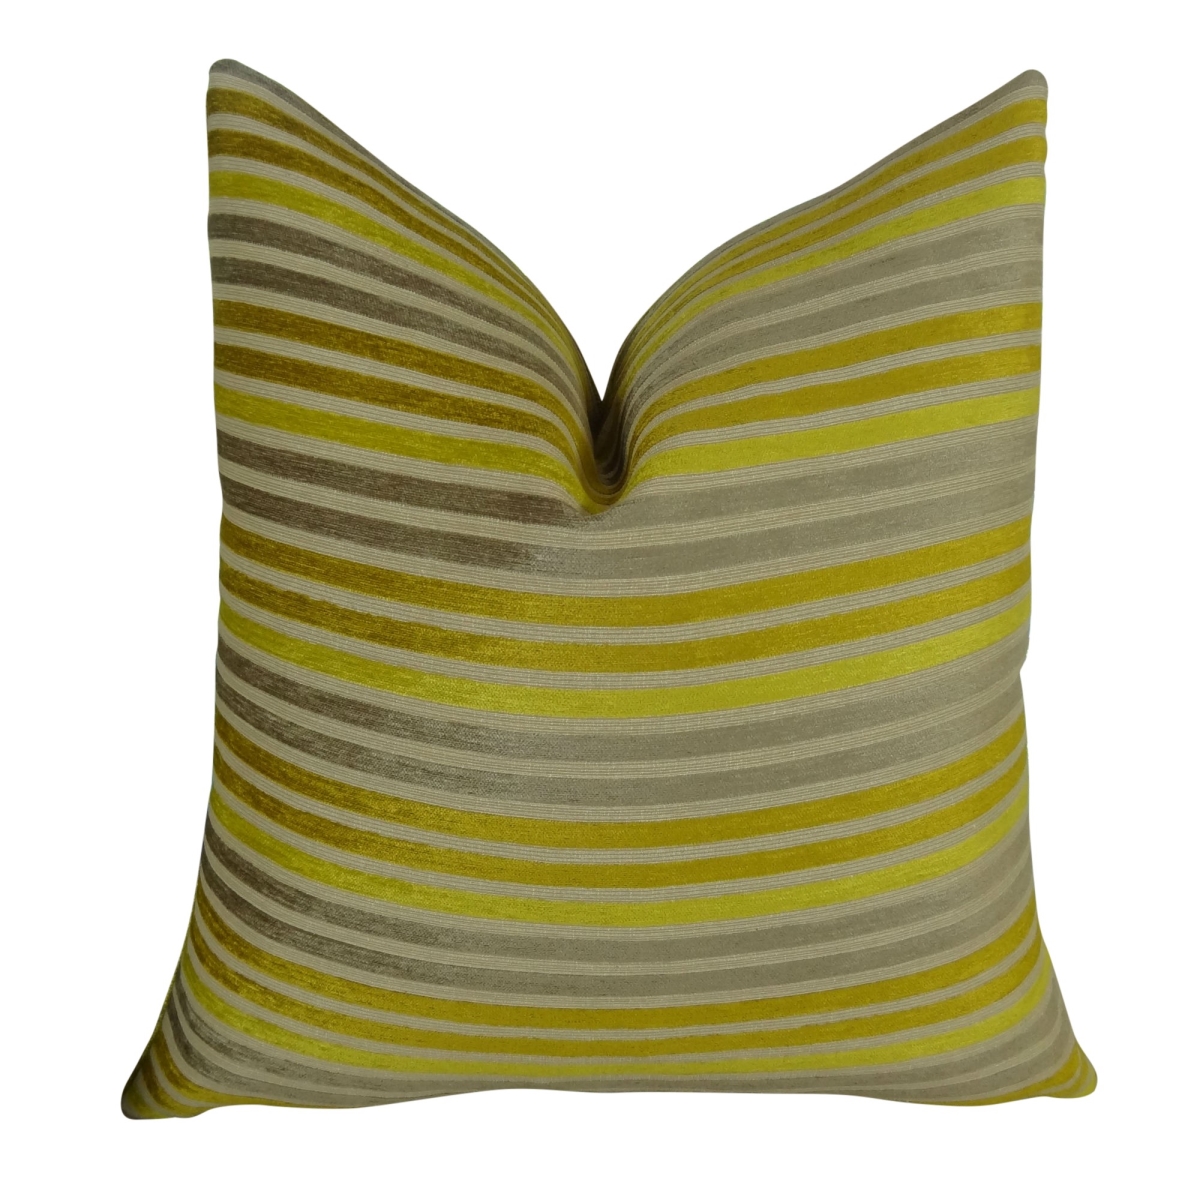 Plutus PB11214-2424-DP Fork Valley Handmade Double Sided Throw Pillow, Lime & Gray - 24 x 24 in.